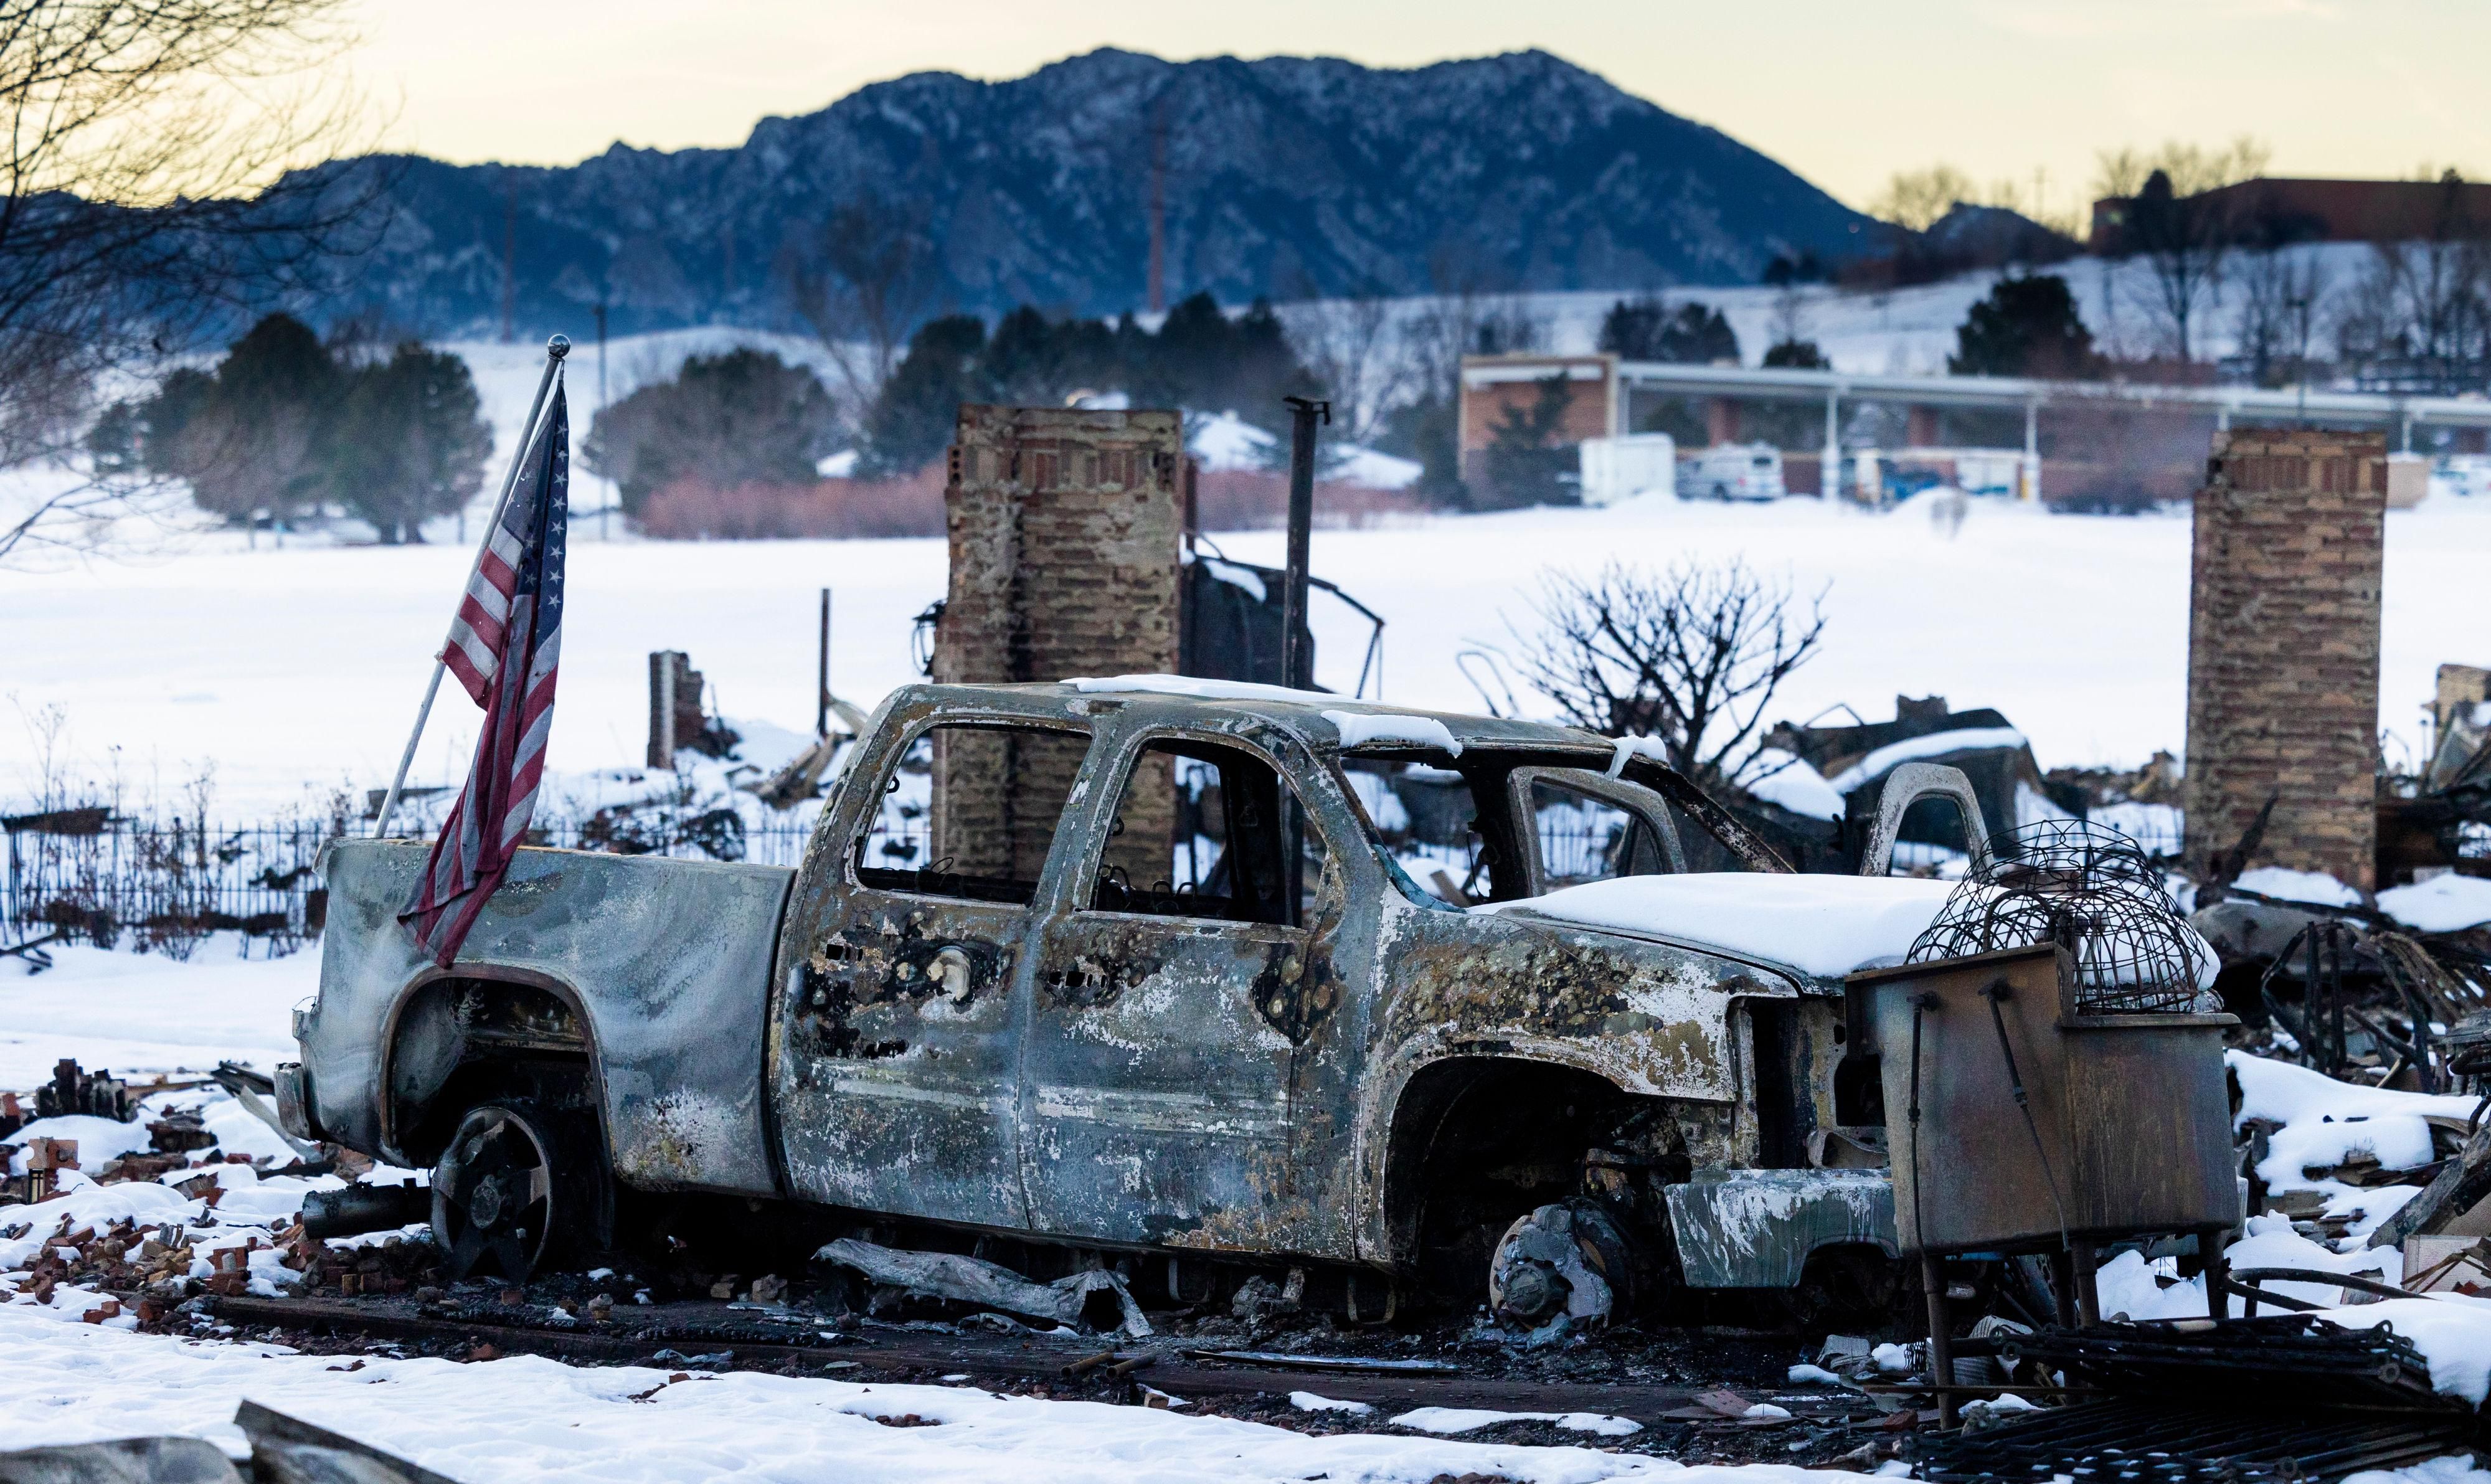 An American flag is shown afixed to a burned truck in a neighborhood decimated by the Marshall Fire on January 2, 2022 in Louisville, Colorado